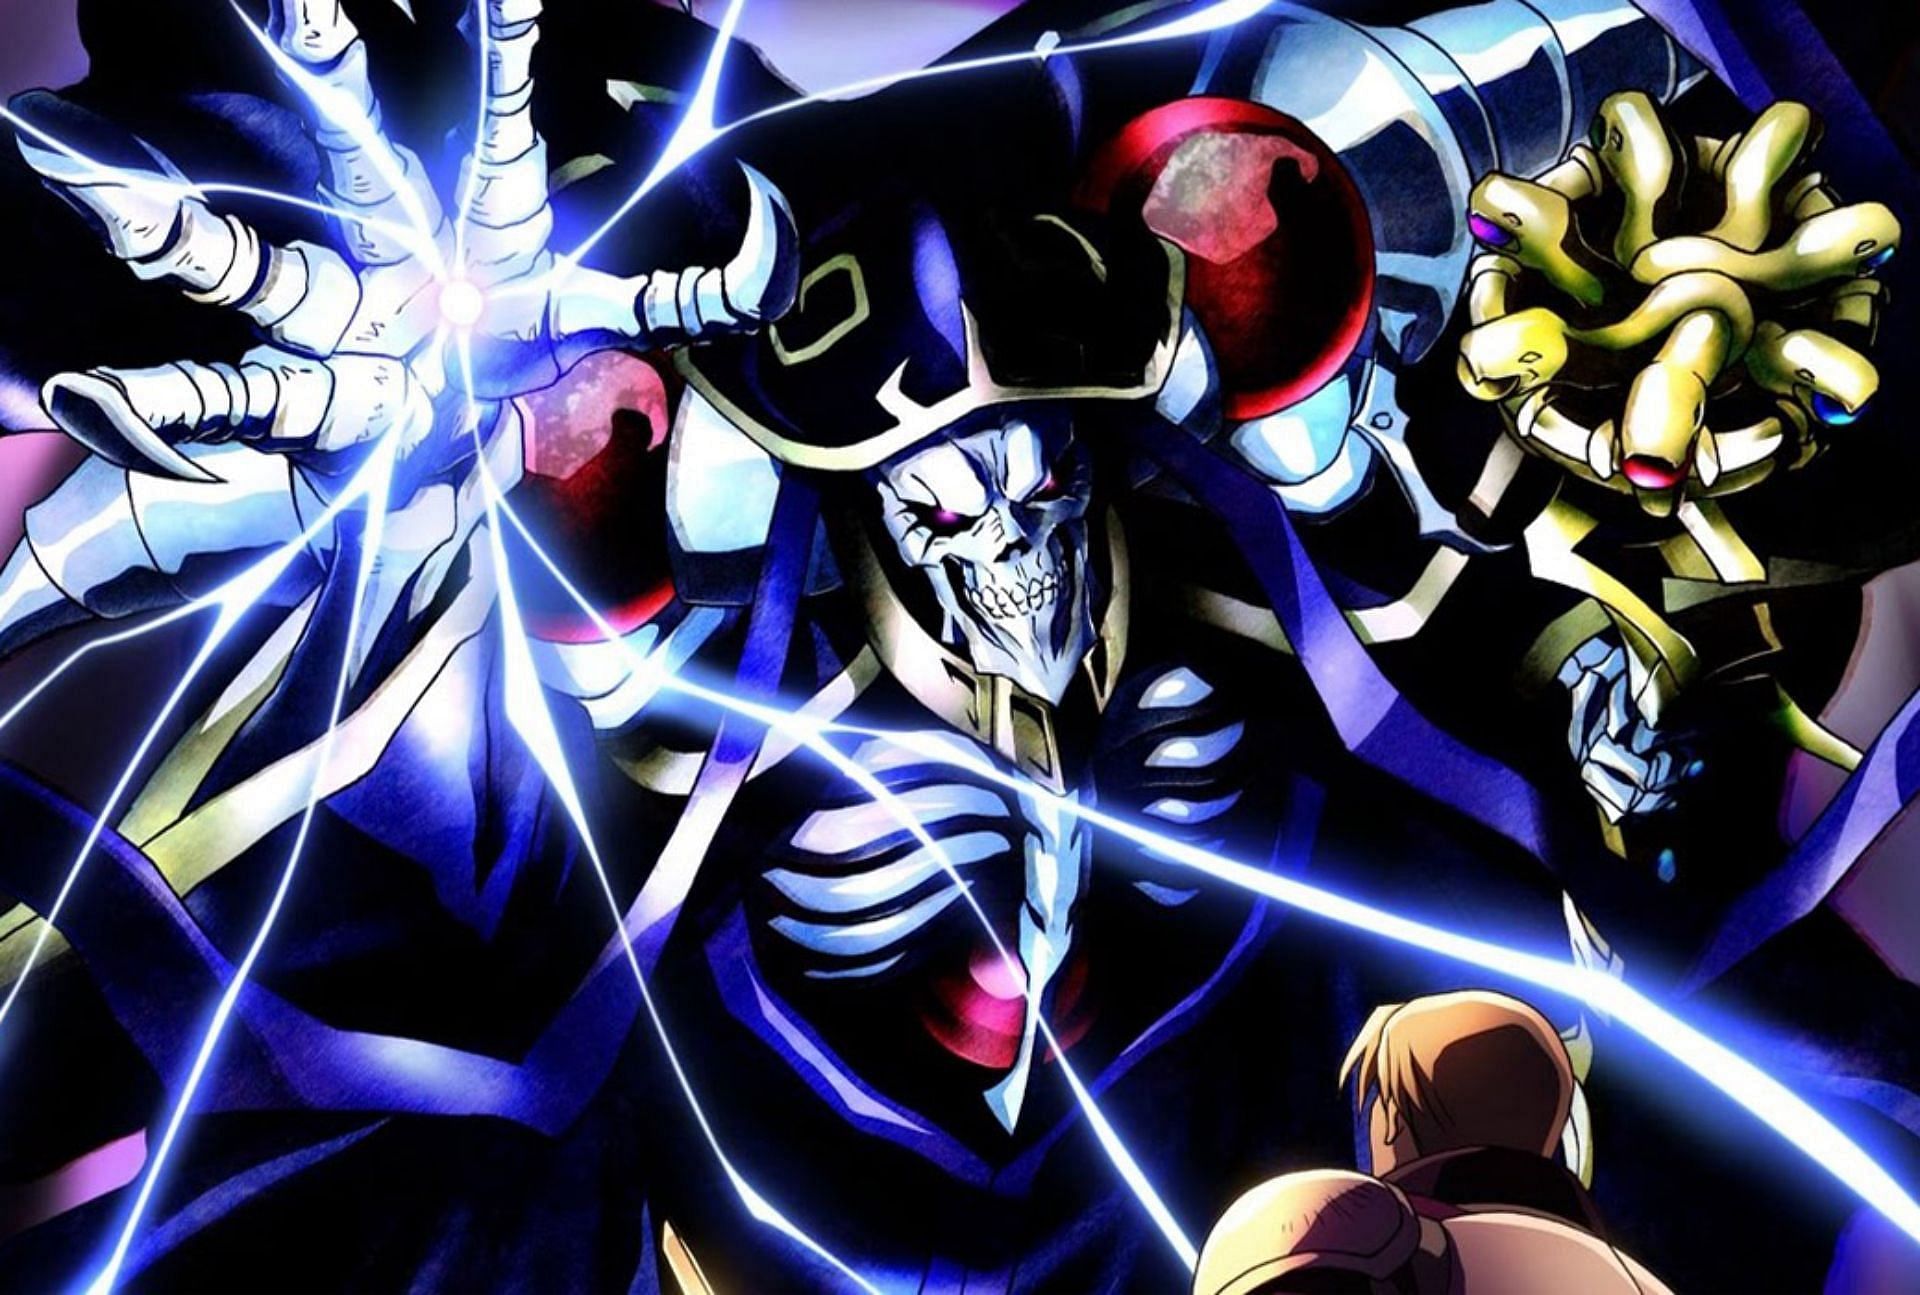 Ainz Ooal Gown in Overlord  (Image via Madhouse)